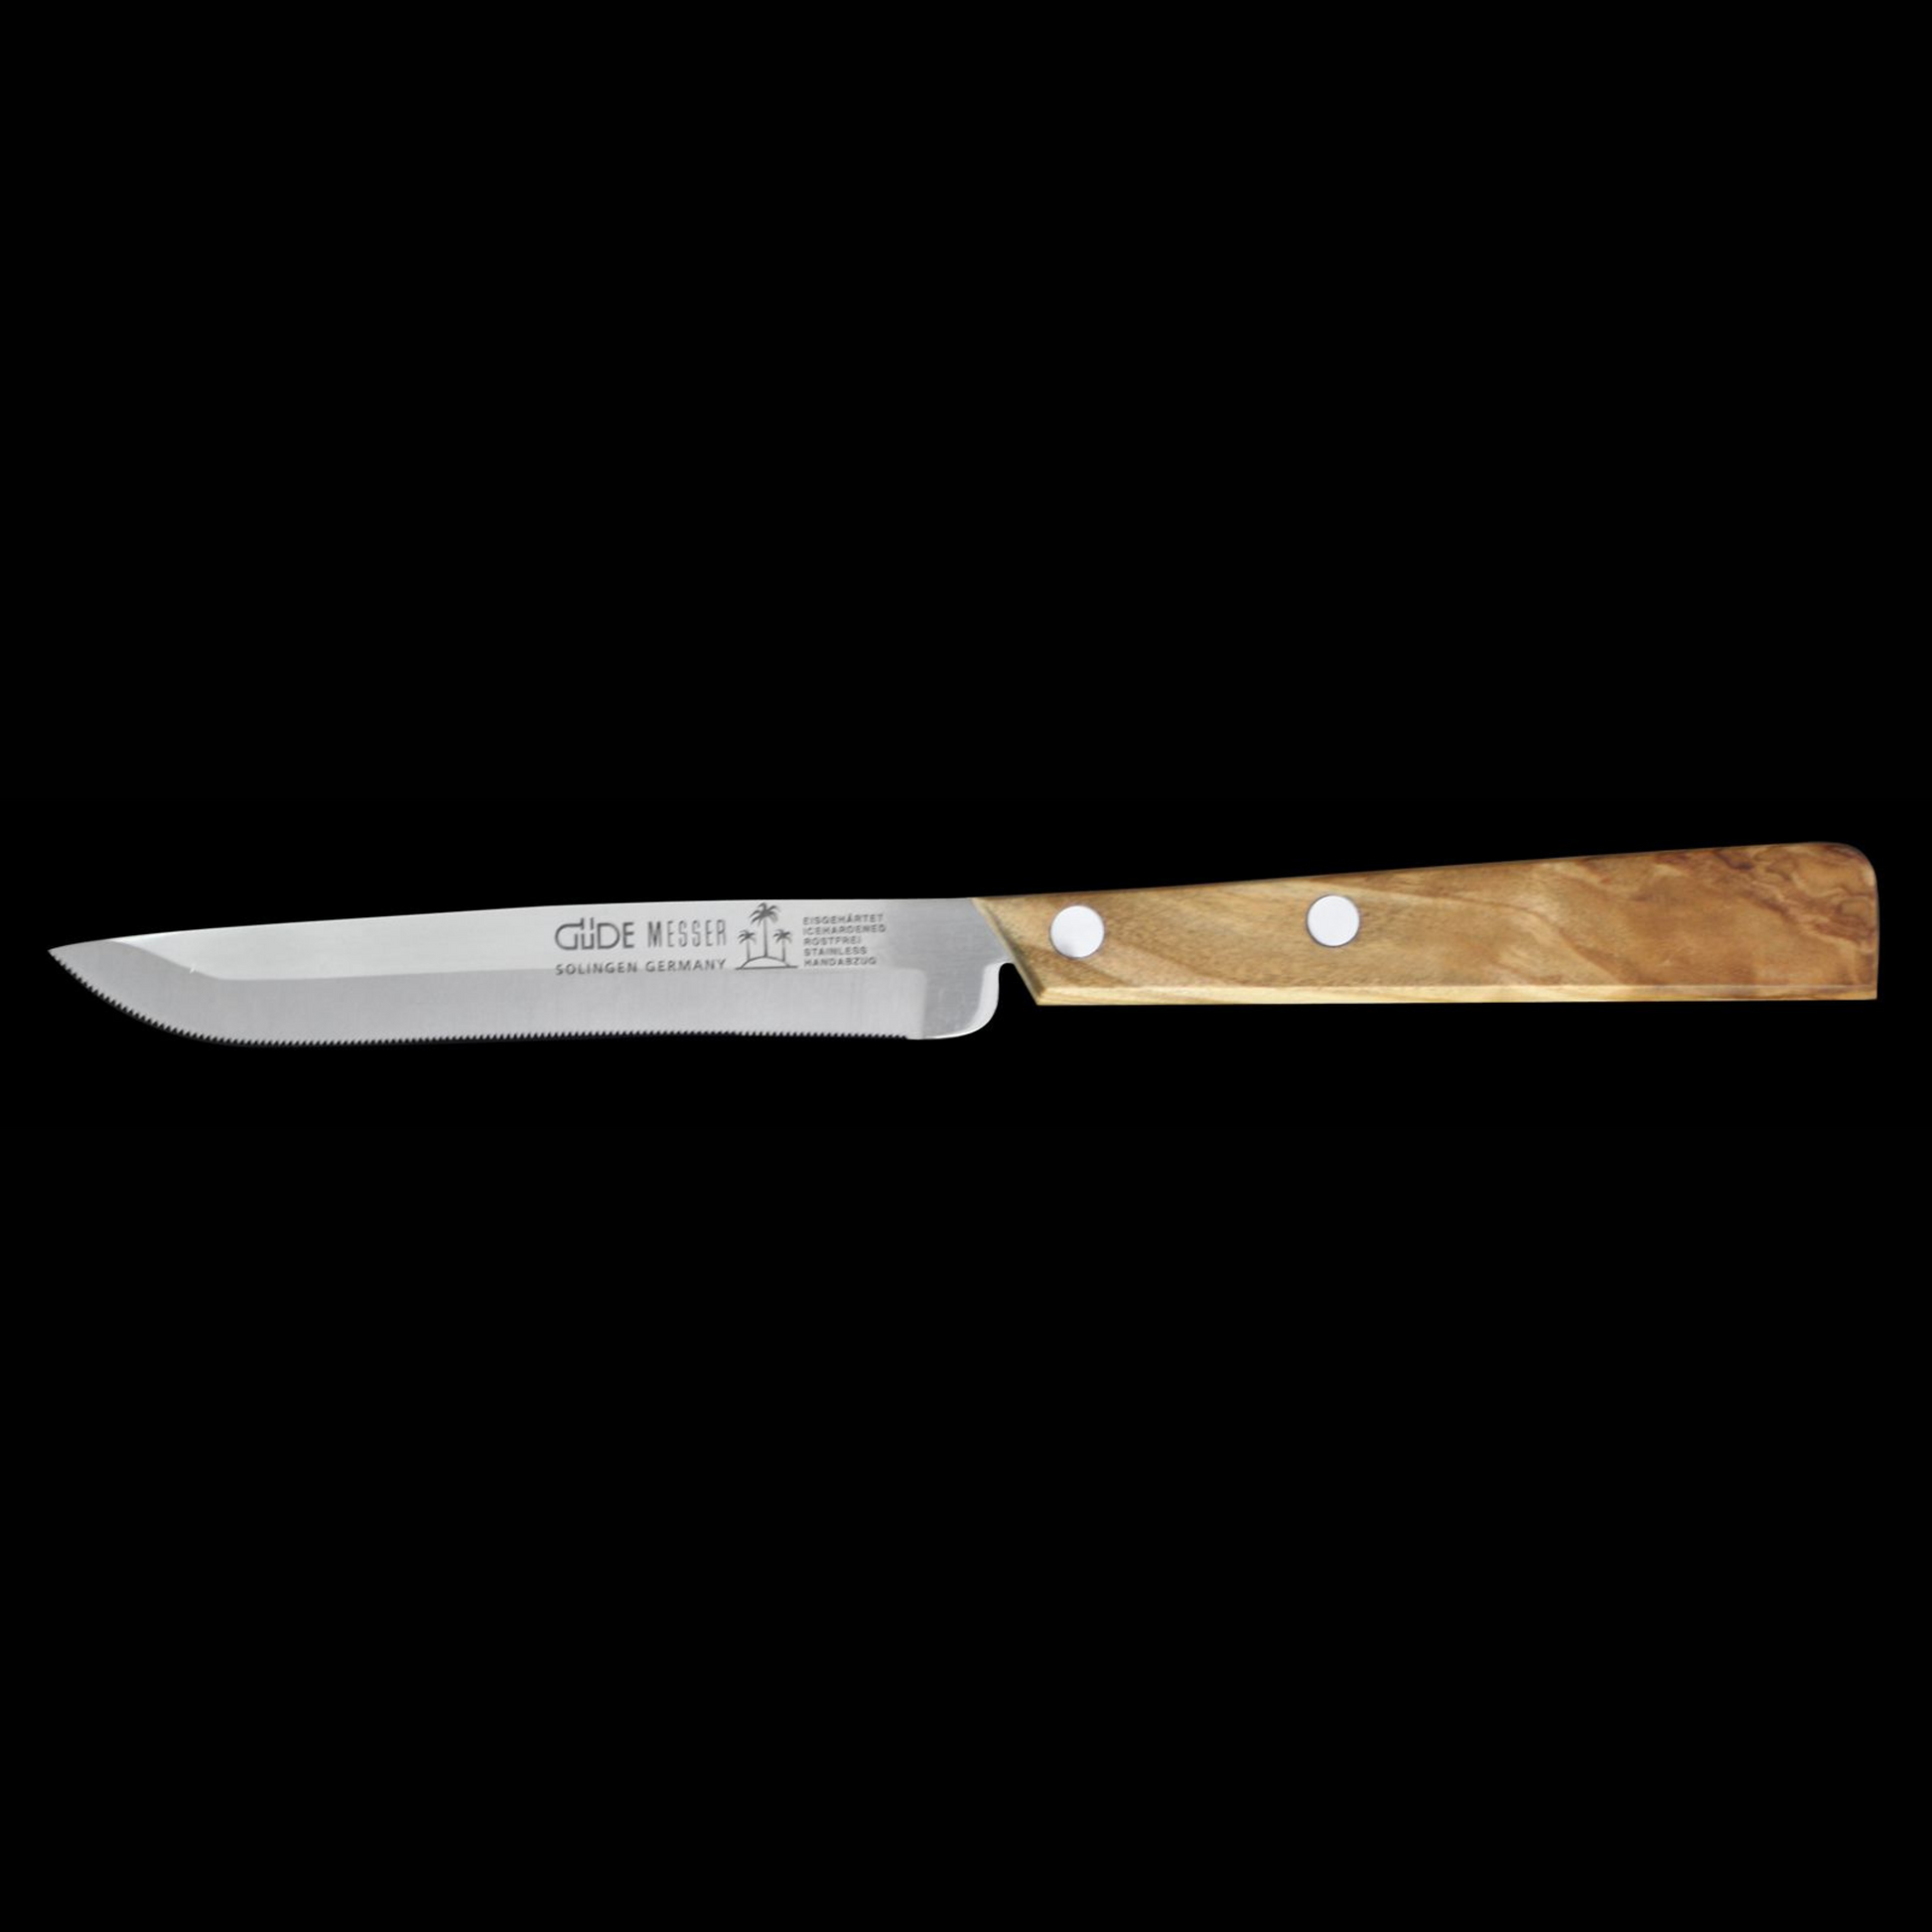 Gude Universal Knife Series 4", Olive Wood Handle - GuedeUSA